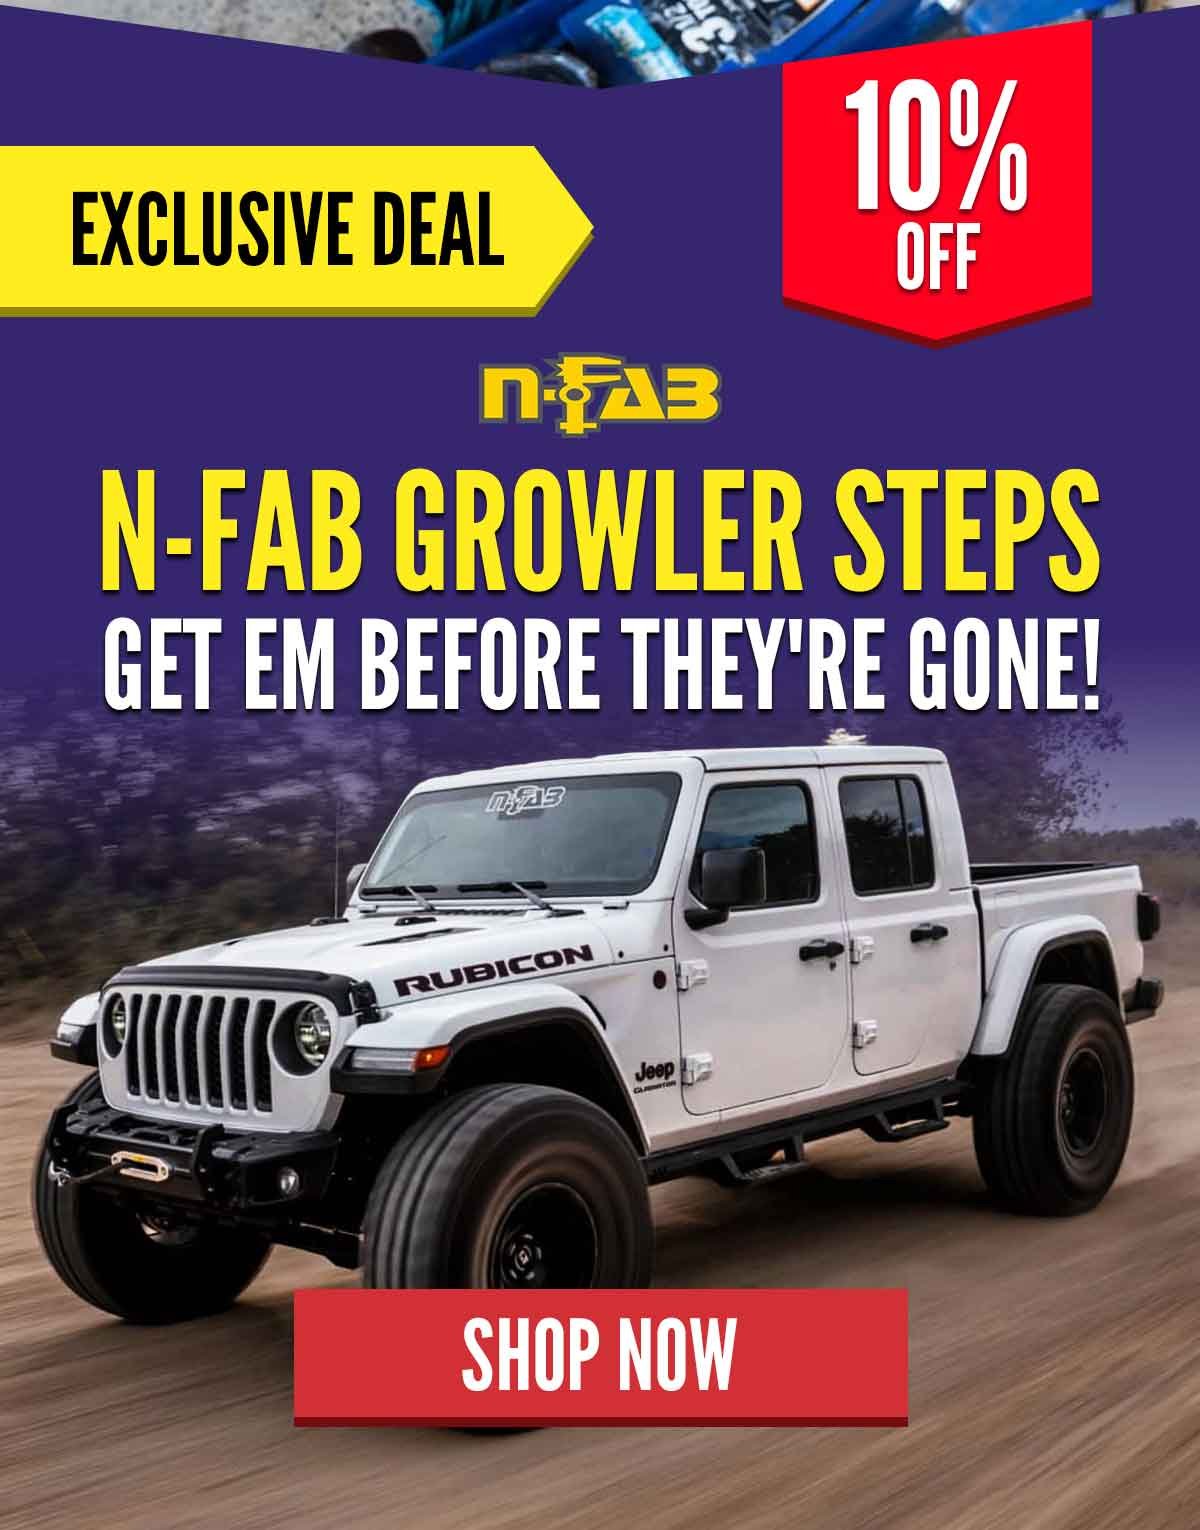 N-FAB Growler Steps Get Em Before They're Gone!